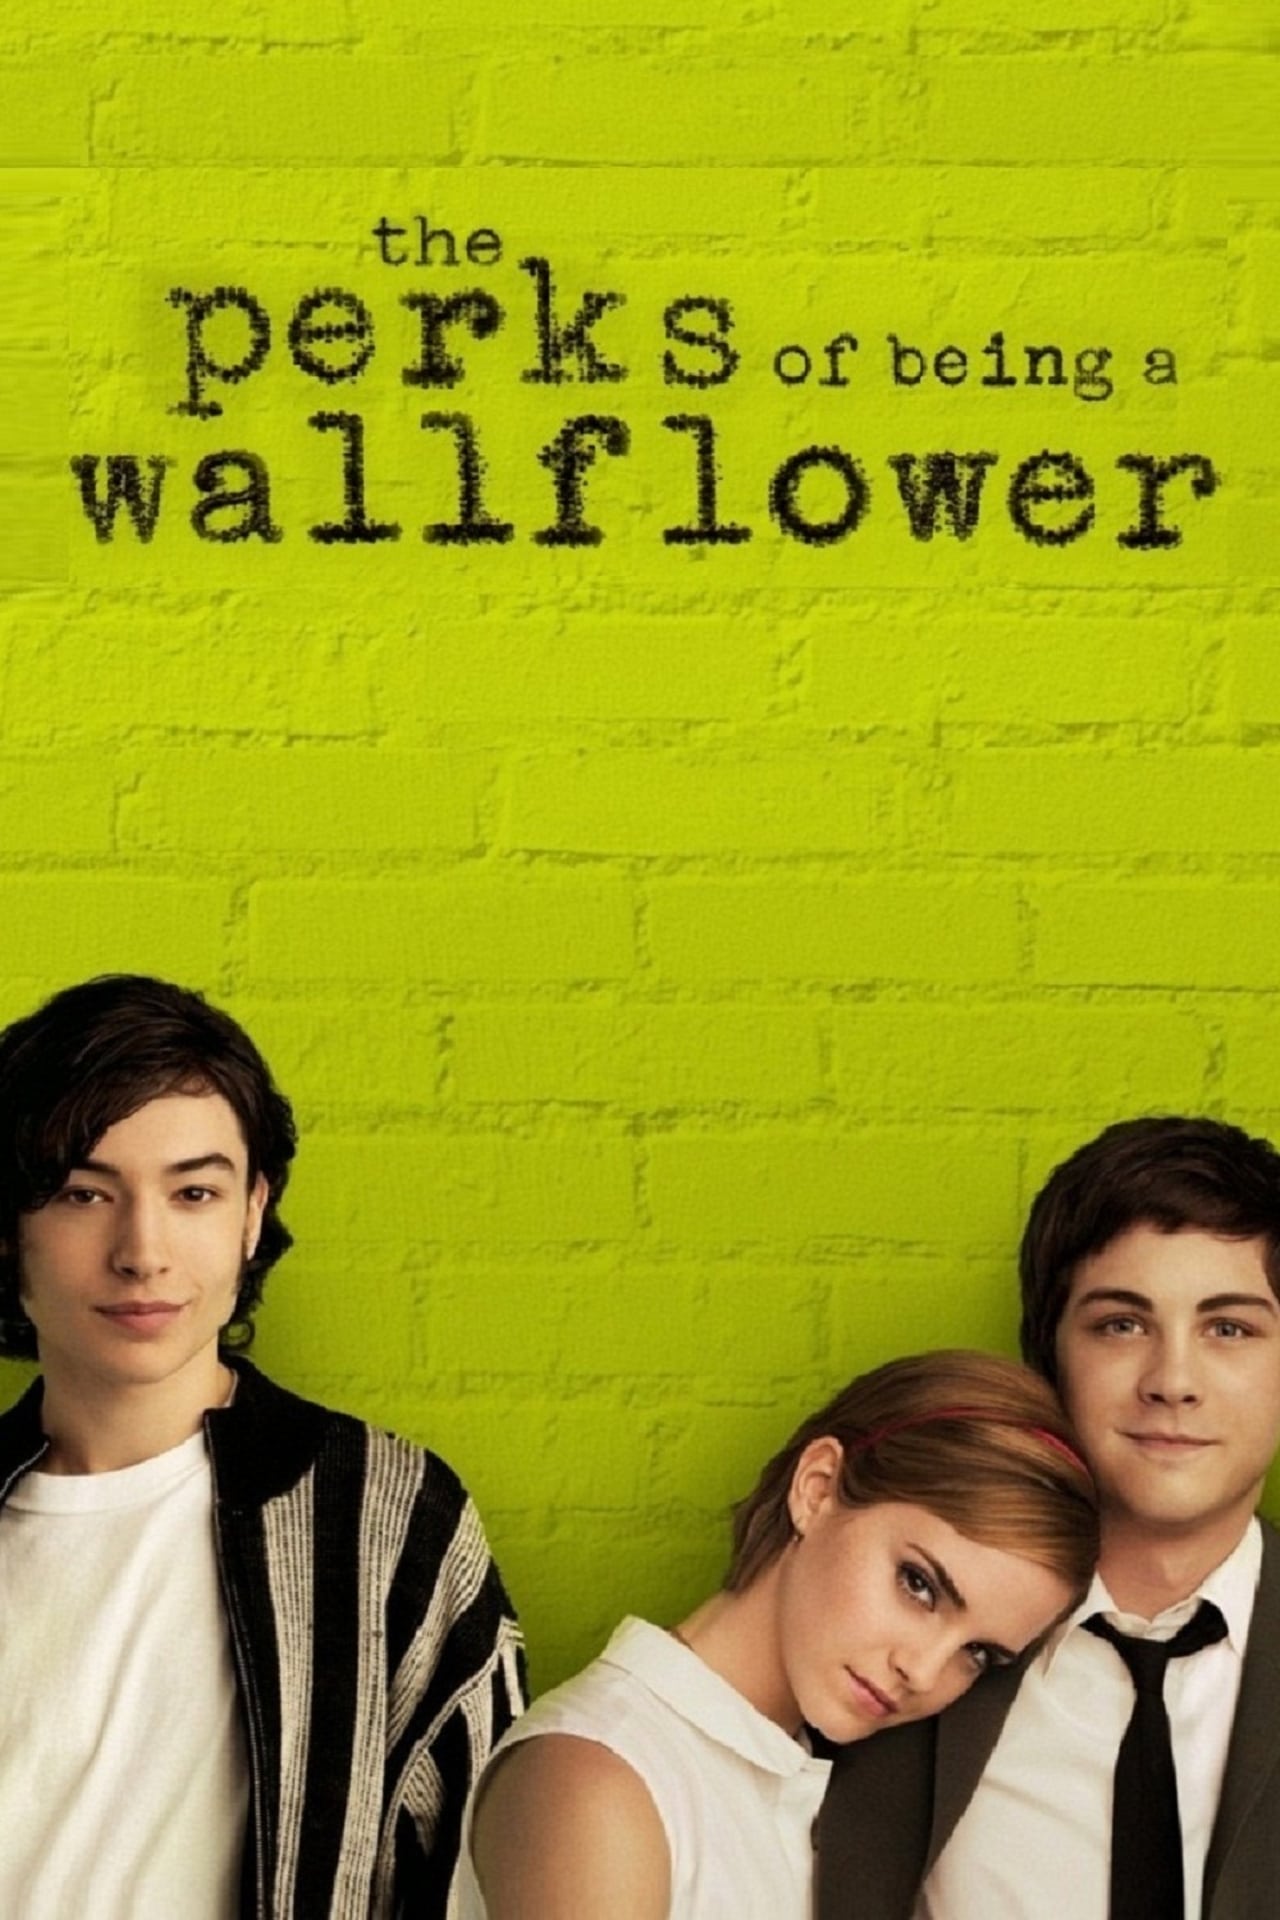 The Perks Of Being A Wallflower Online Subtitrat The Perks of Being a Wallflower subtitles English | opensubtitles.com